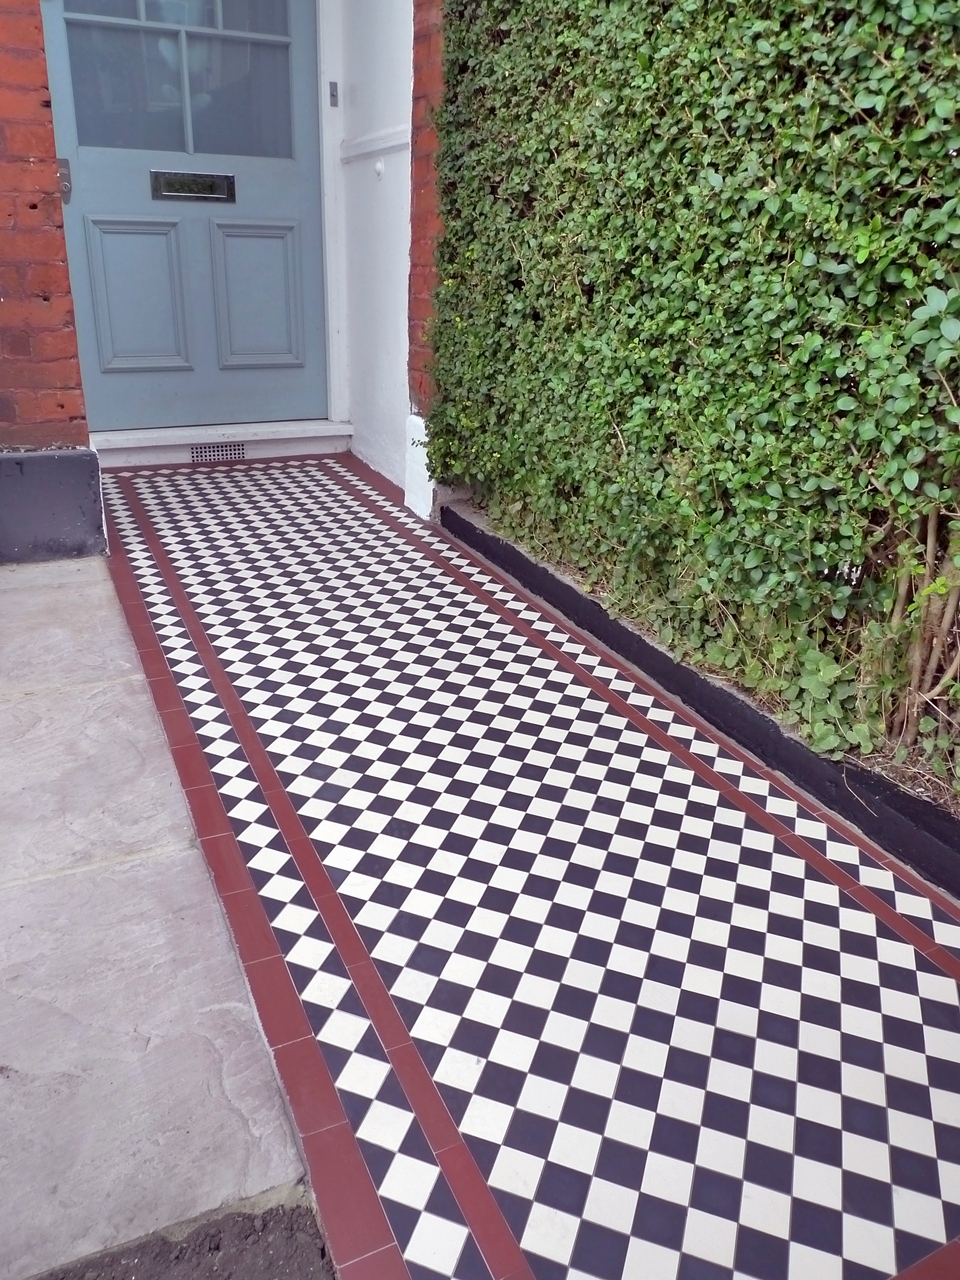 front-garden-tile-path-mosaic-with-red-strips-and-black-and-white-tiles-london.JPG